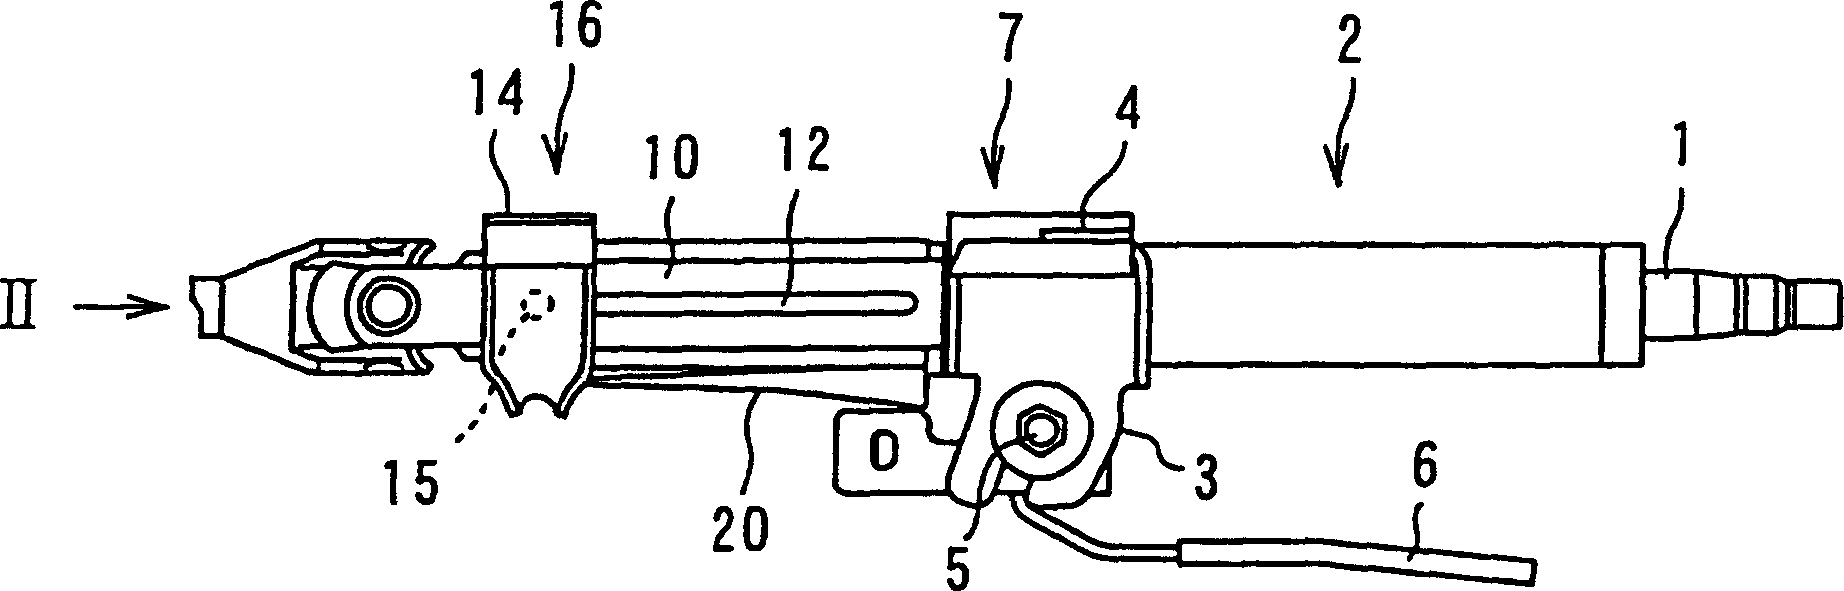 Steering post support device